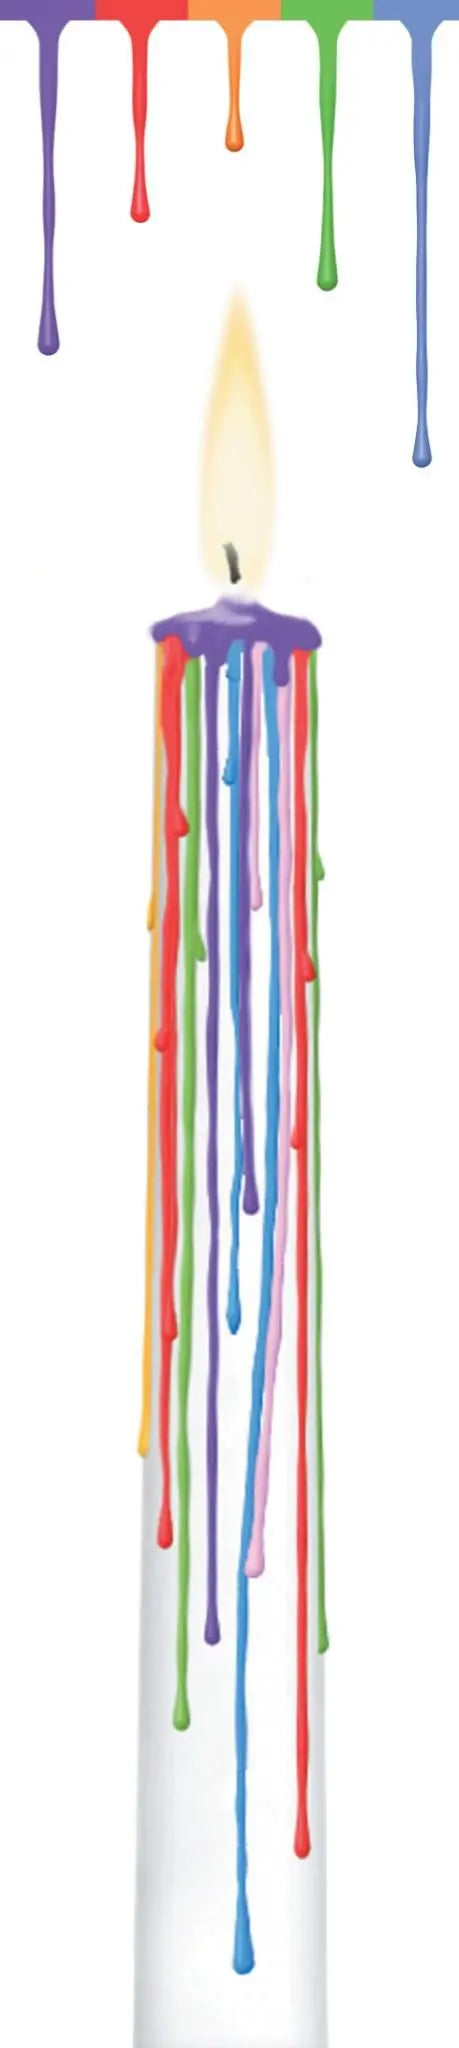 Drip Candle - Multi Colour Drip Candle (Pack of 2)